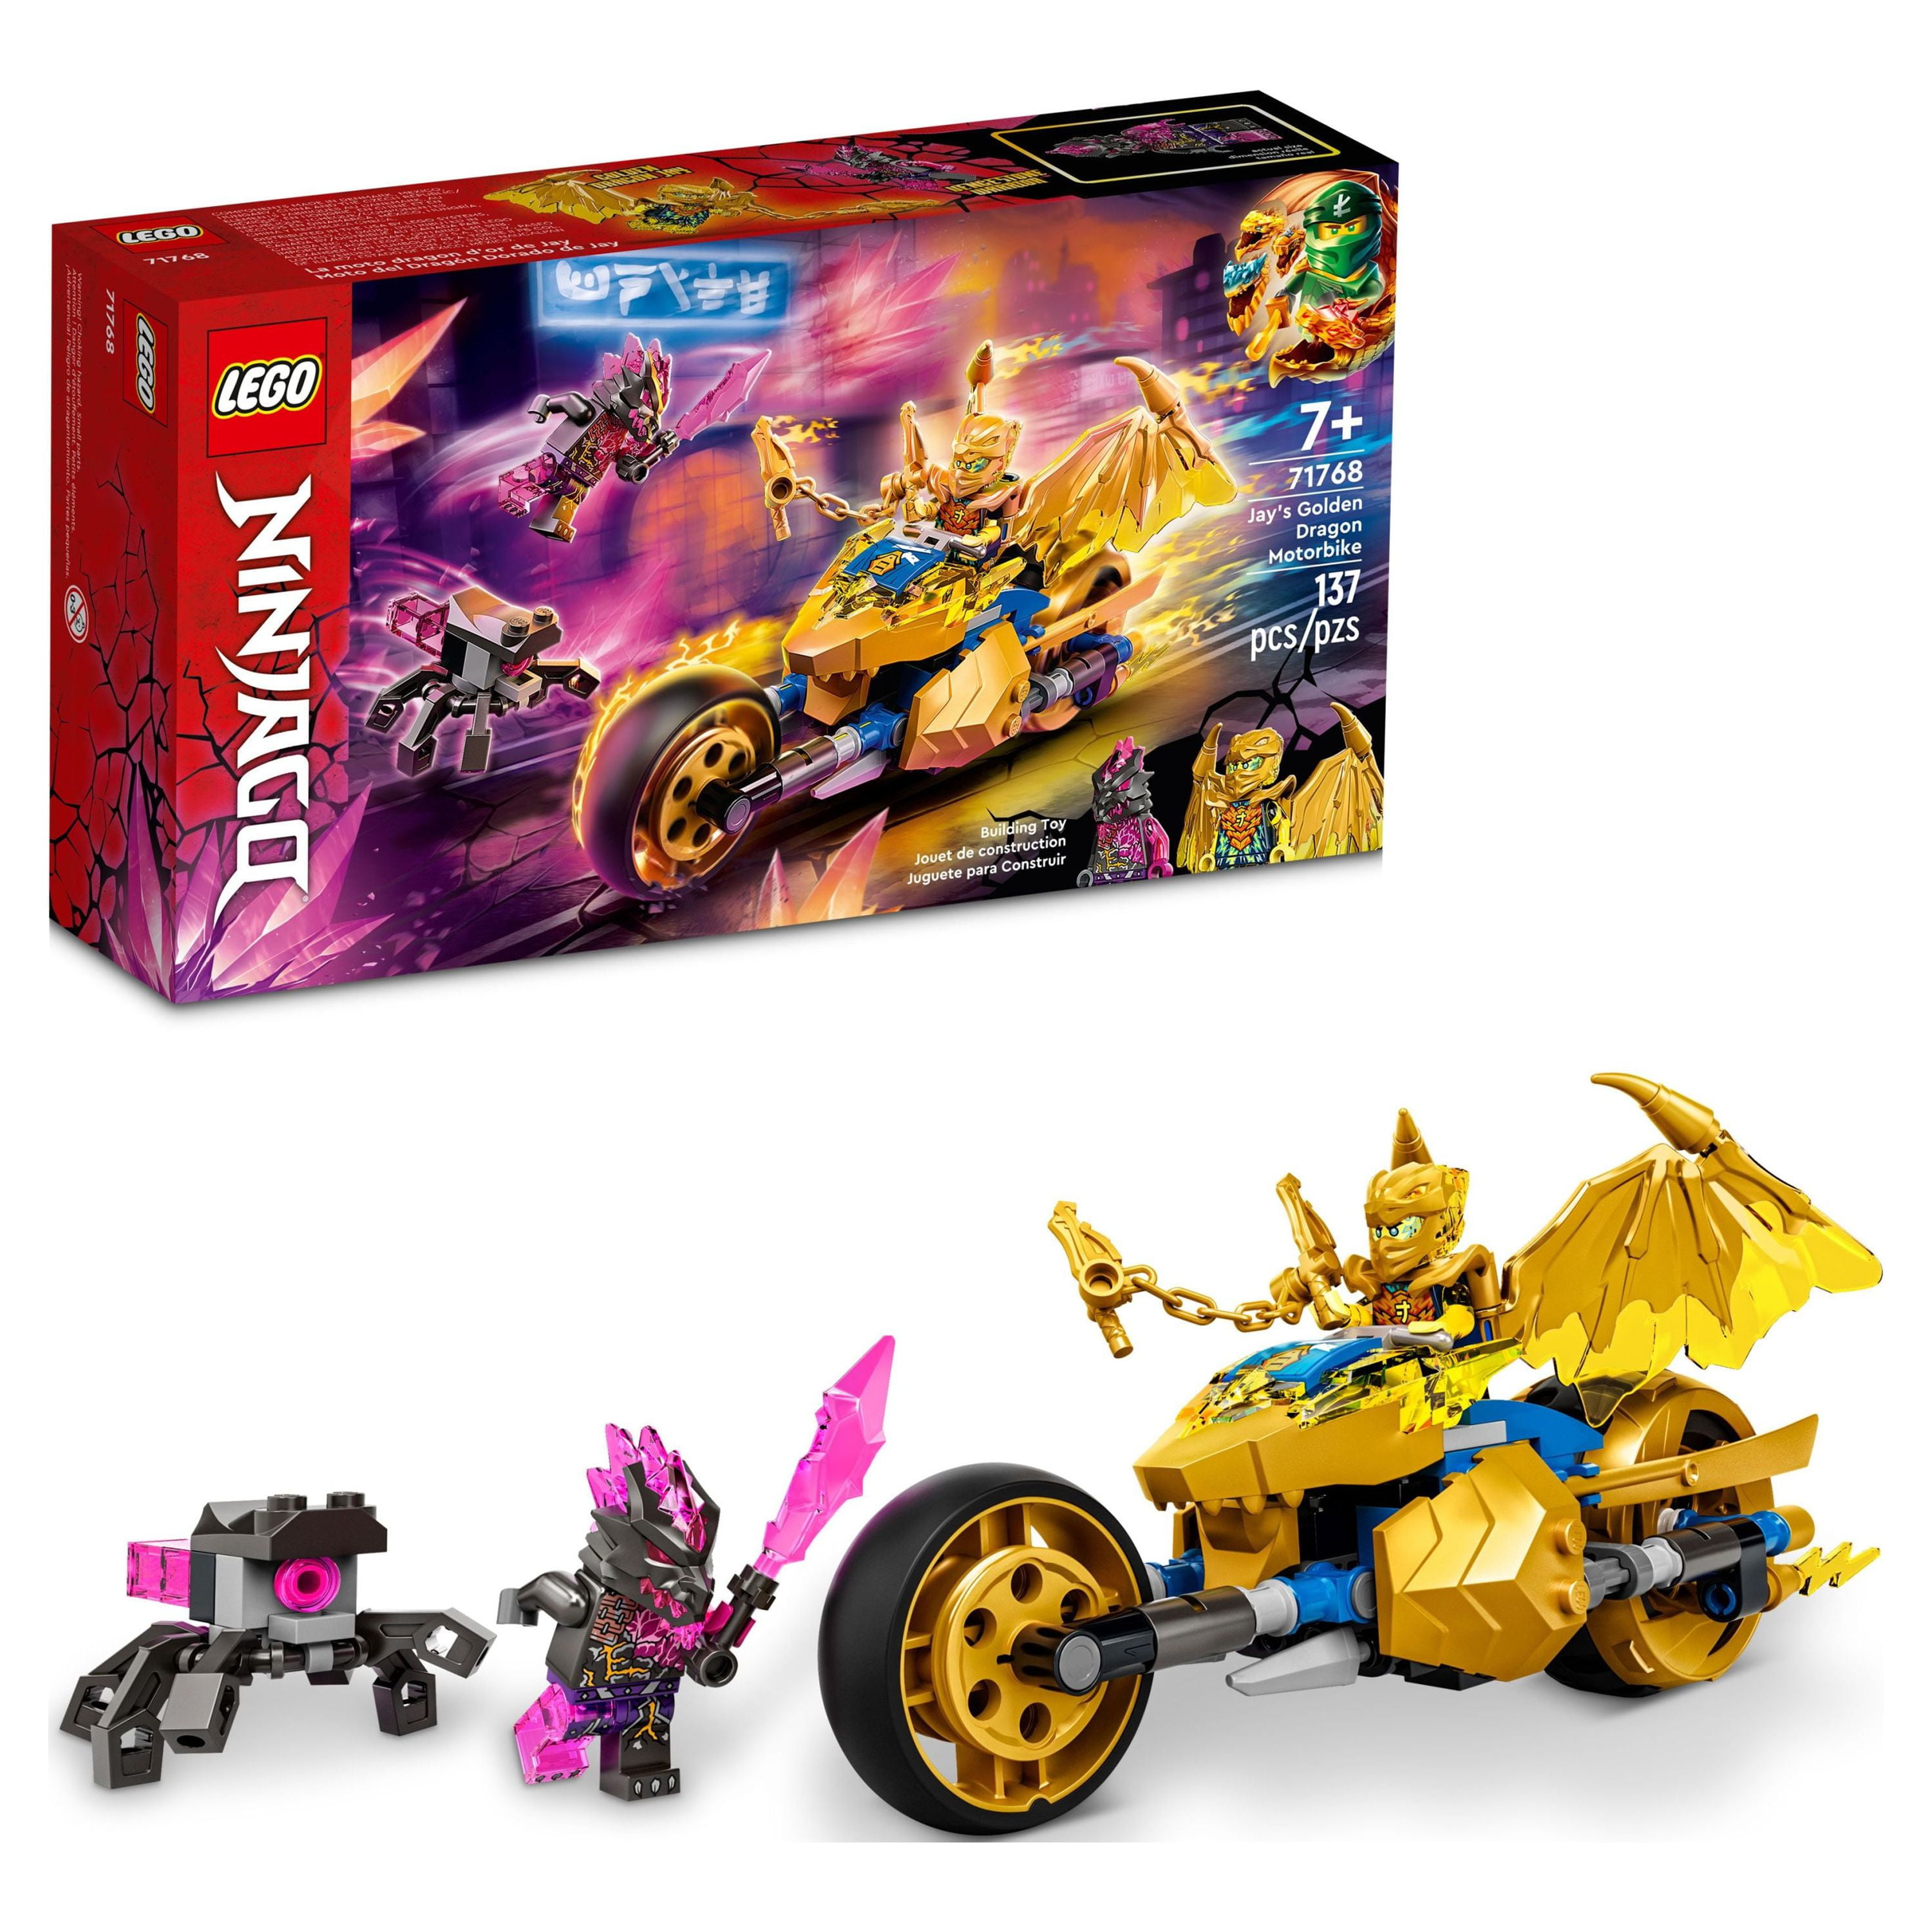 LEGO NINJAGO Jay's Golden Dragon Set, 71768 Toy Motorcycle with Dragon,  Spider Figure and Jay Minifigure, Birthday Gift Idea For Kids Plus 